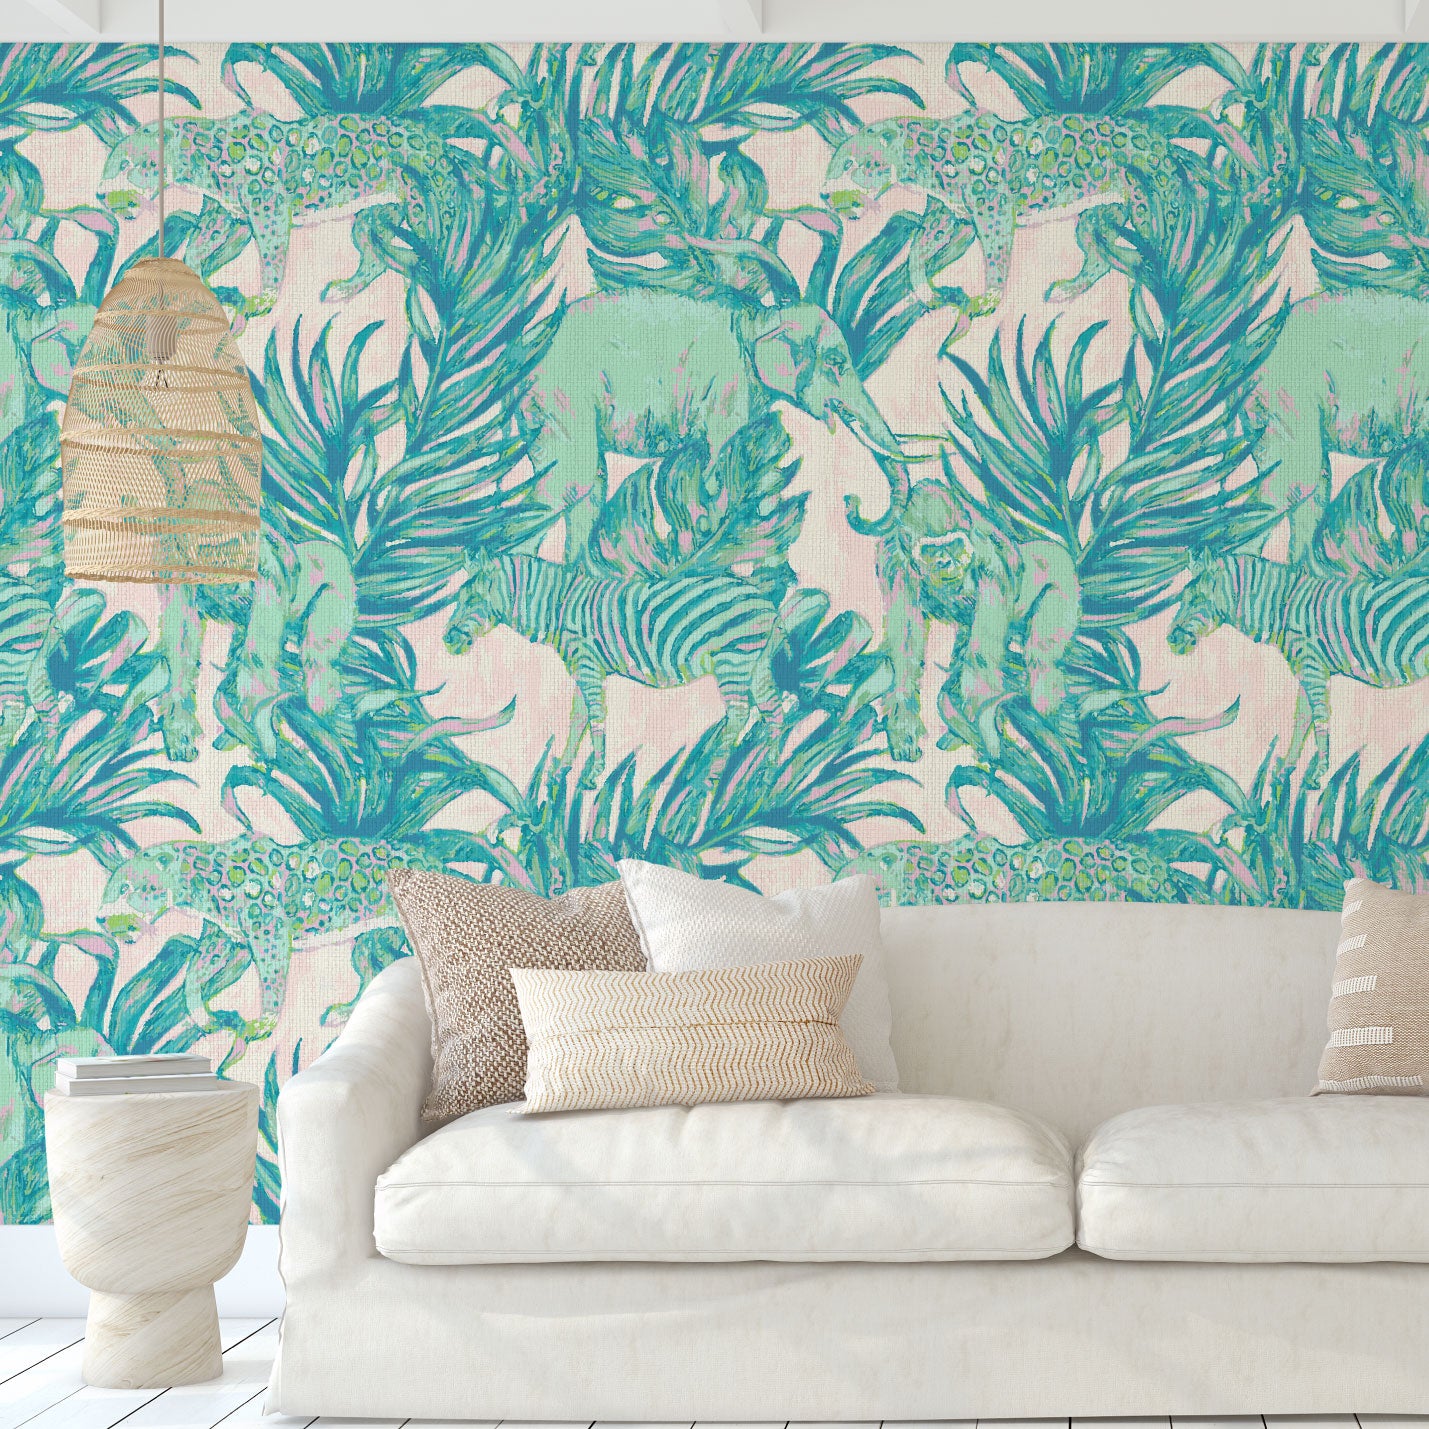 wallpaper Natural Textured Eco-Friendly Non-toxic High-quality Sustainable Interior Design Bold Custom Tropical Jungle Coastal Garden palm leaf tree zoo safari elephant zebra cheetah gorilla water color oversized kids playroom nursery teal green pastel neon pink living room paperweave paper weave